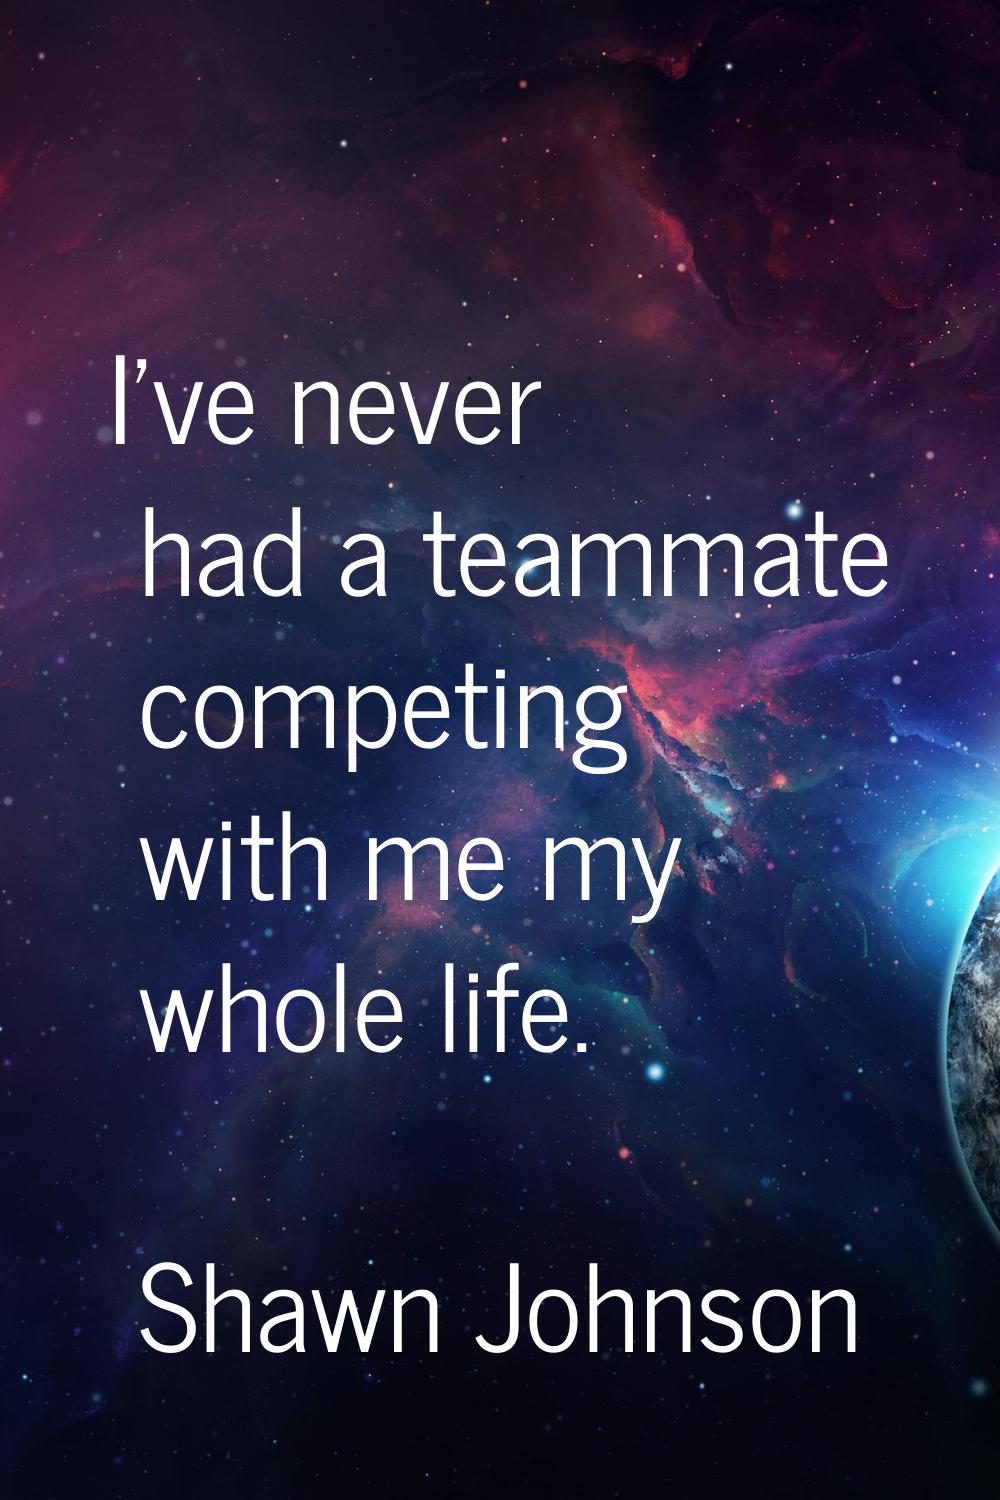 I've never had a teammate competing with me my whole life.